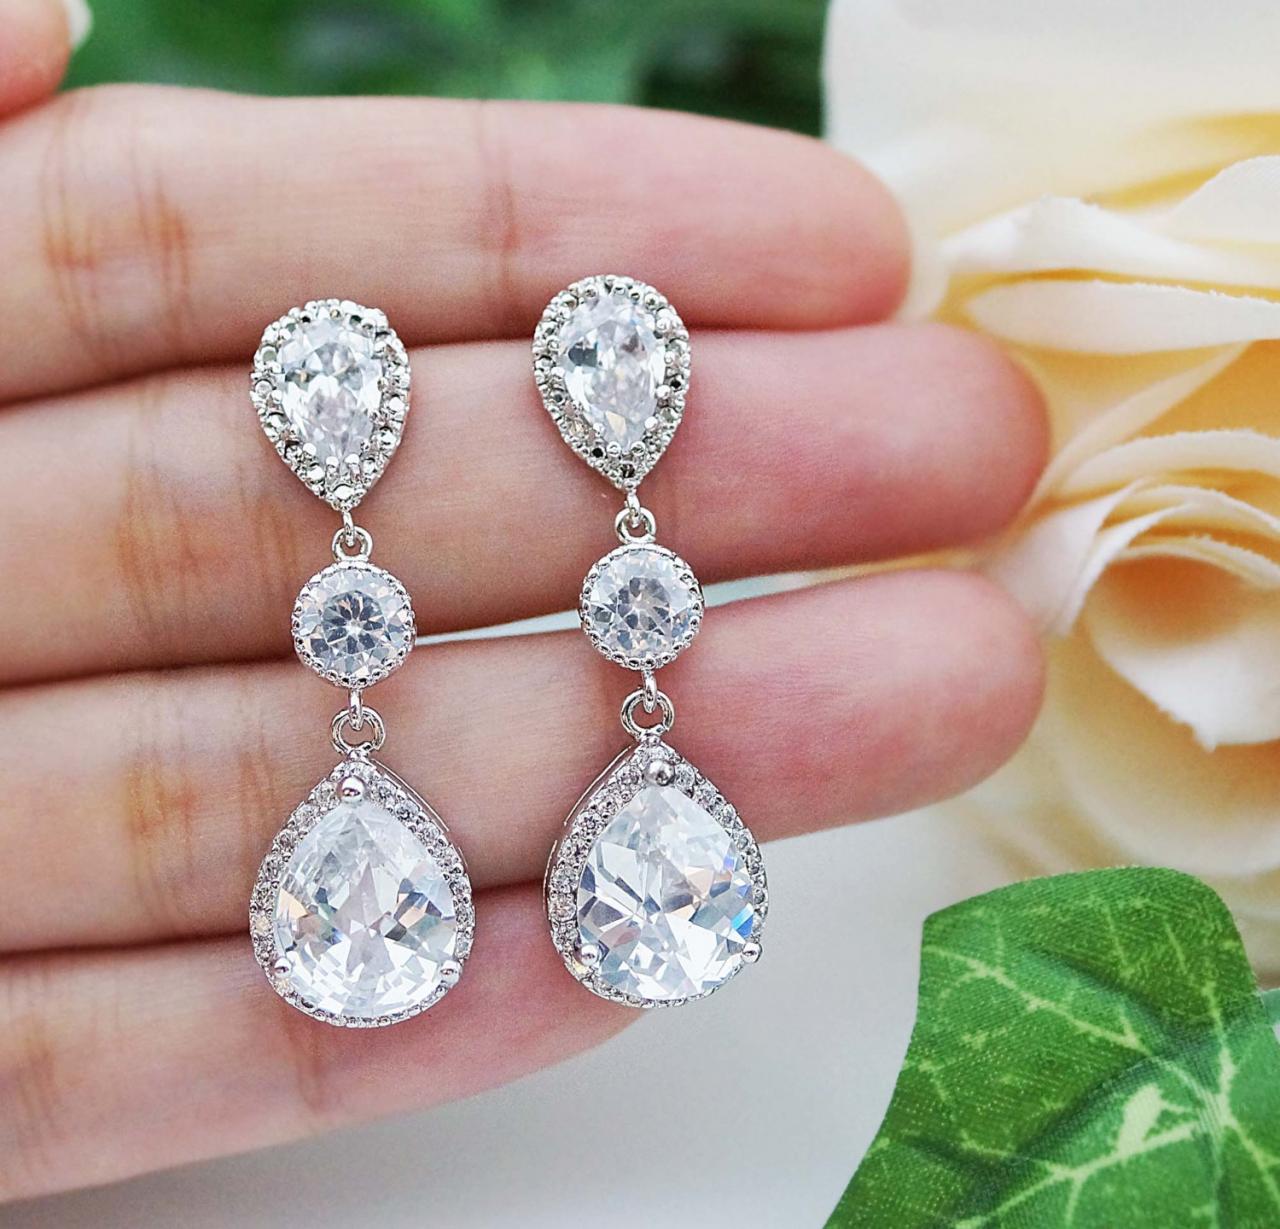 Wedding Bridal Jewelry Bridal Earrings Dangle Earrings Cubic Zirconia Connectors And Clear (lux) Cubic Zirconia Tear Drop Bridesmaid Gift